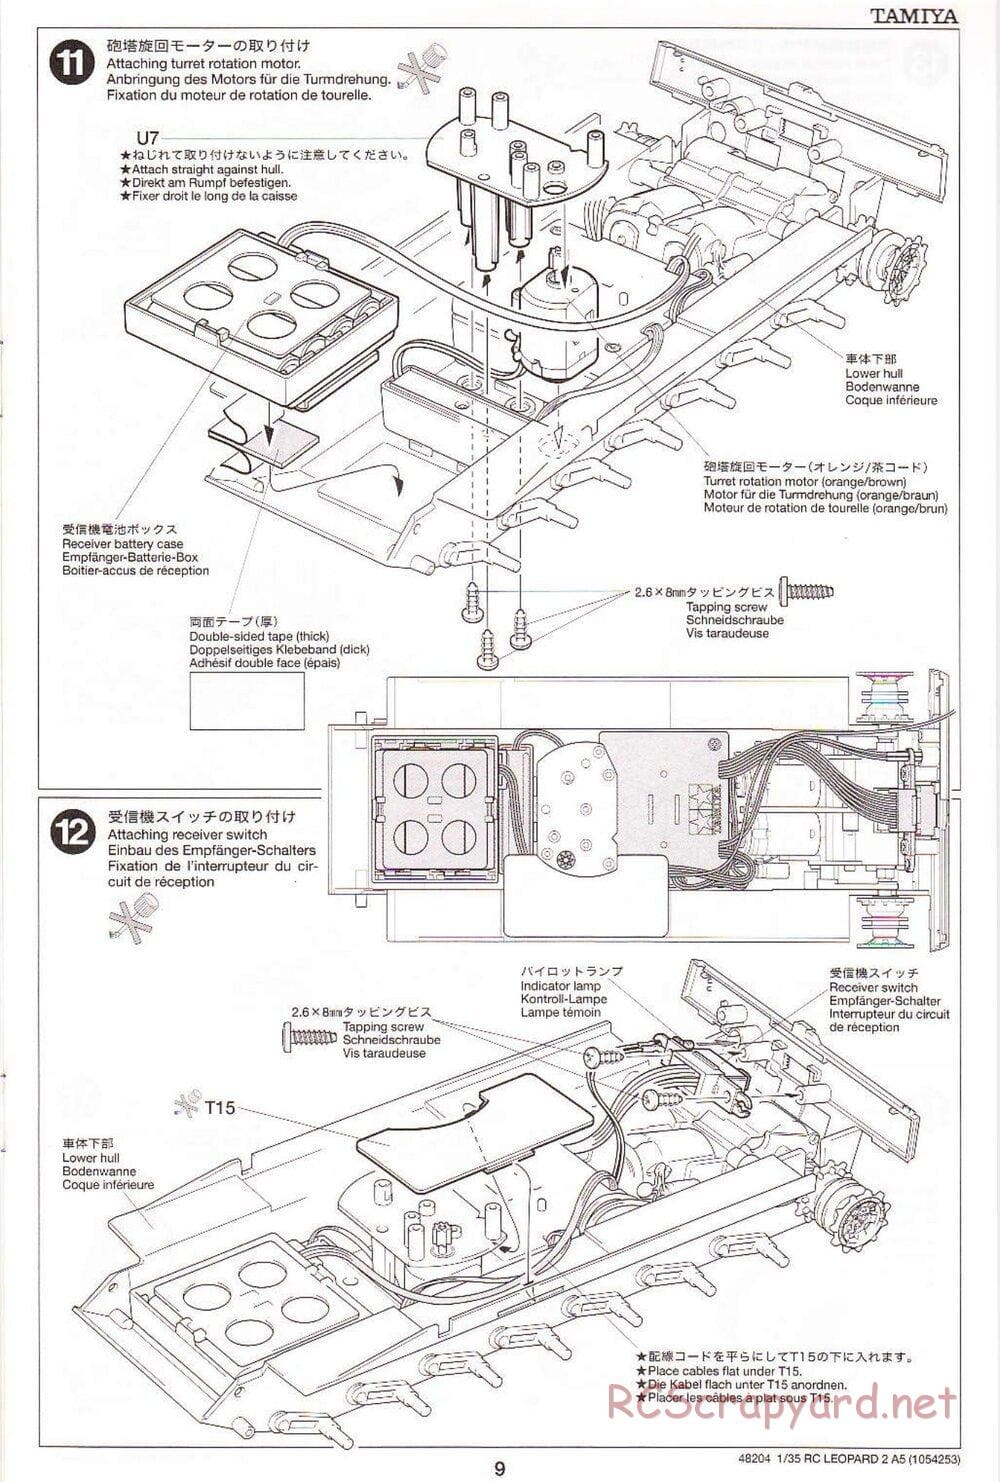 Tamiya - Leopard 2 A5 Main Battle Tank - 1/35 Scale Chassis - Manual - Page 9